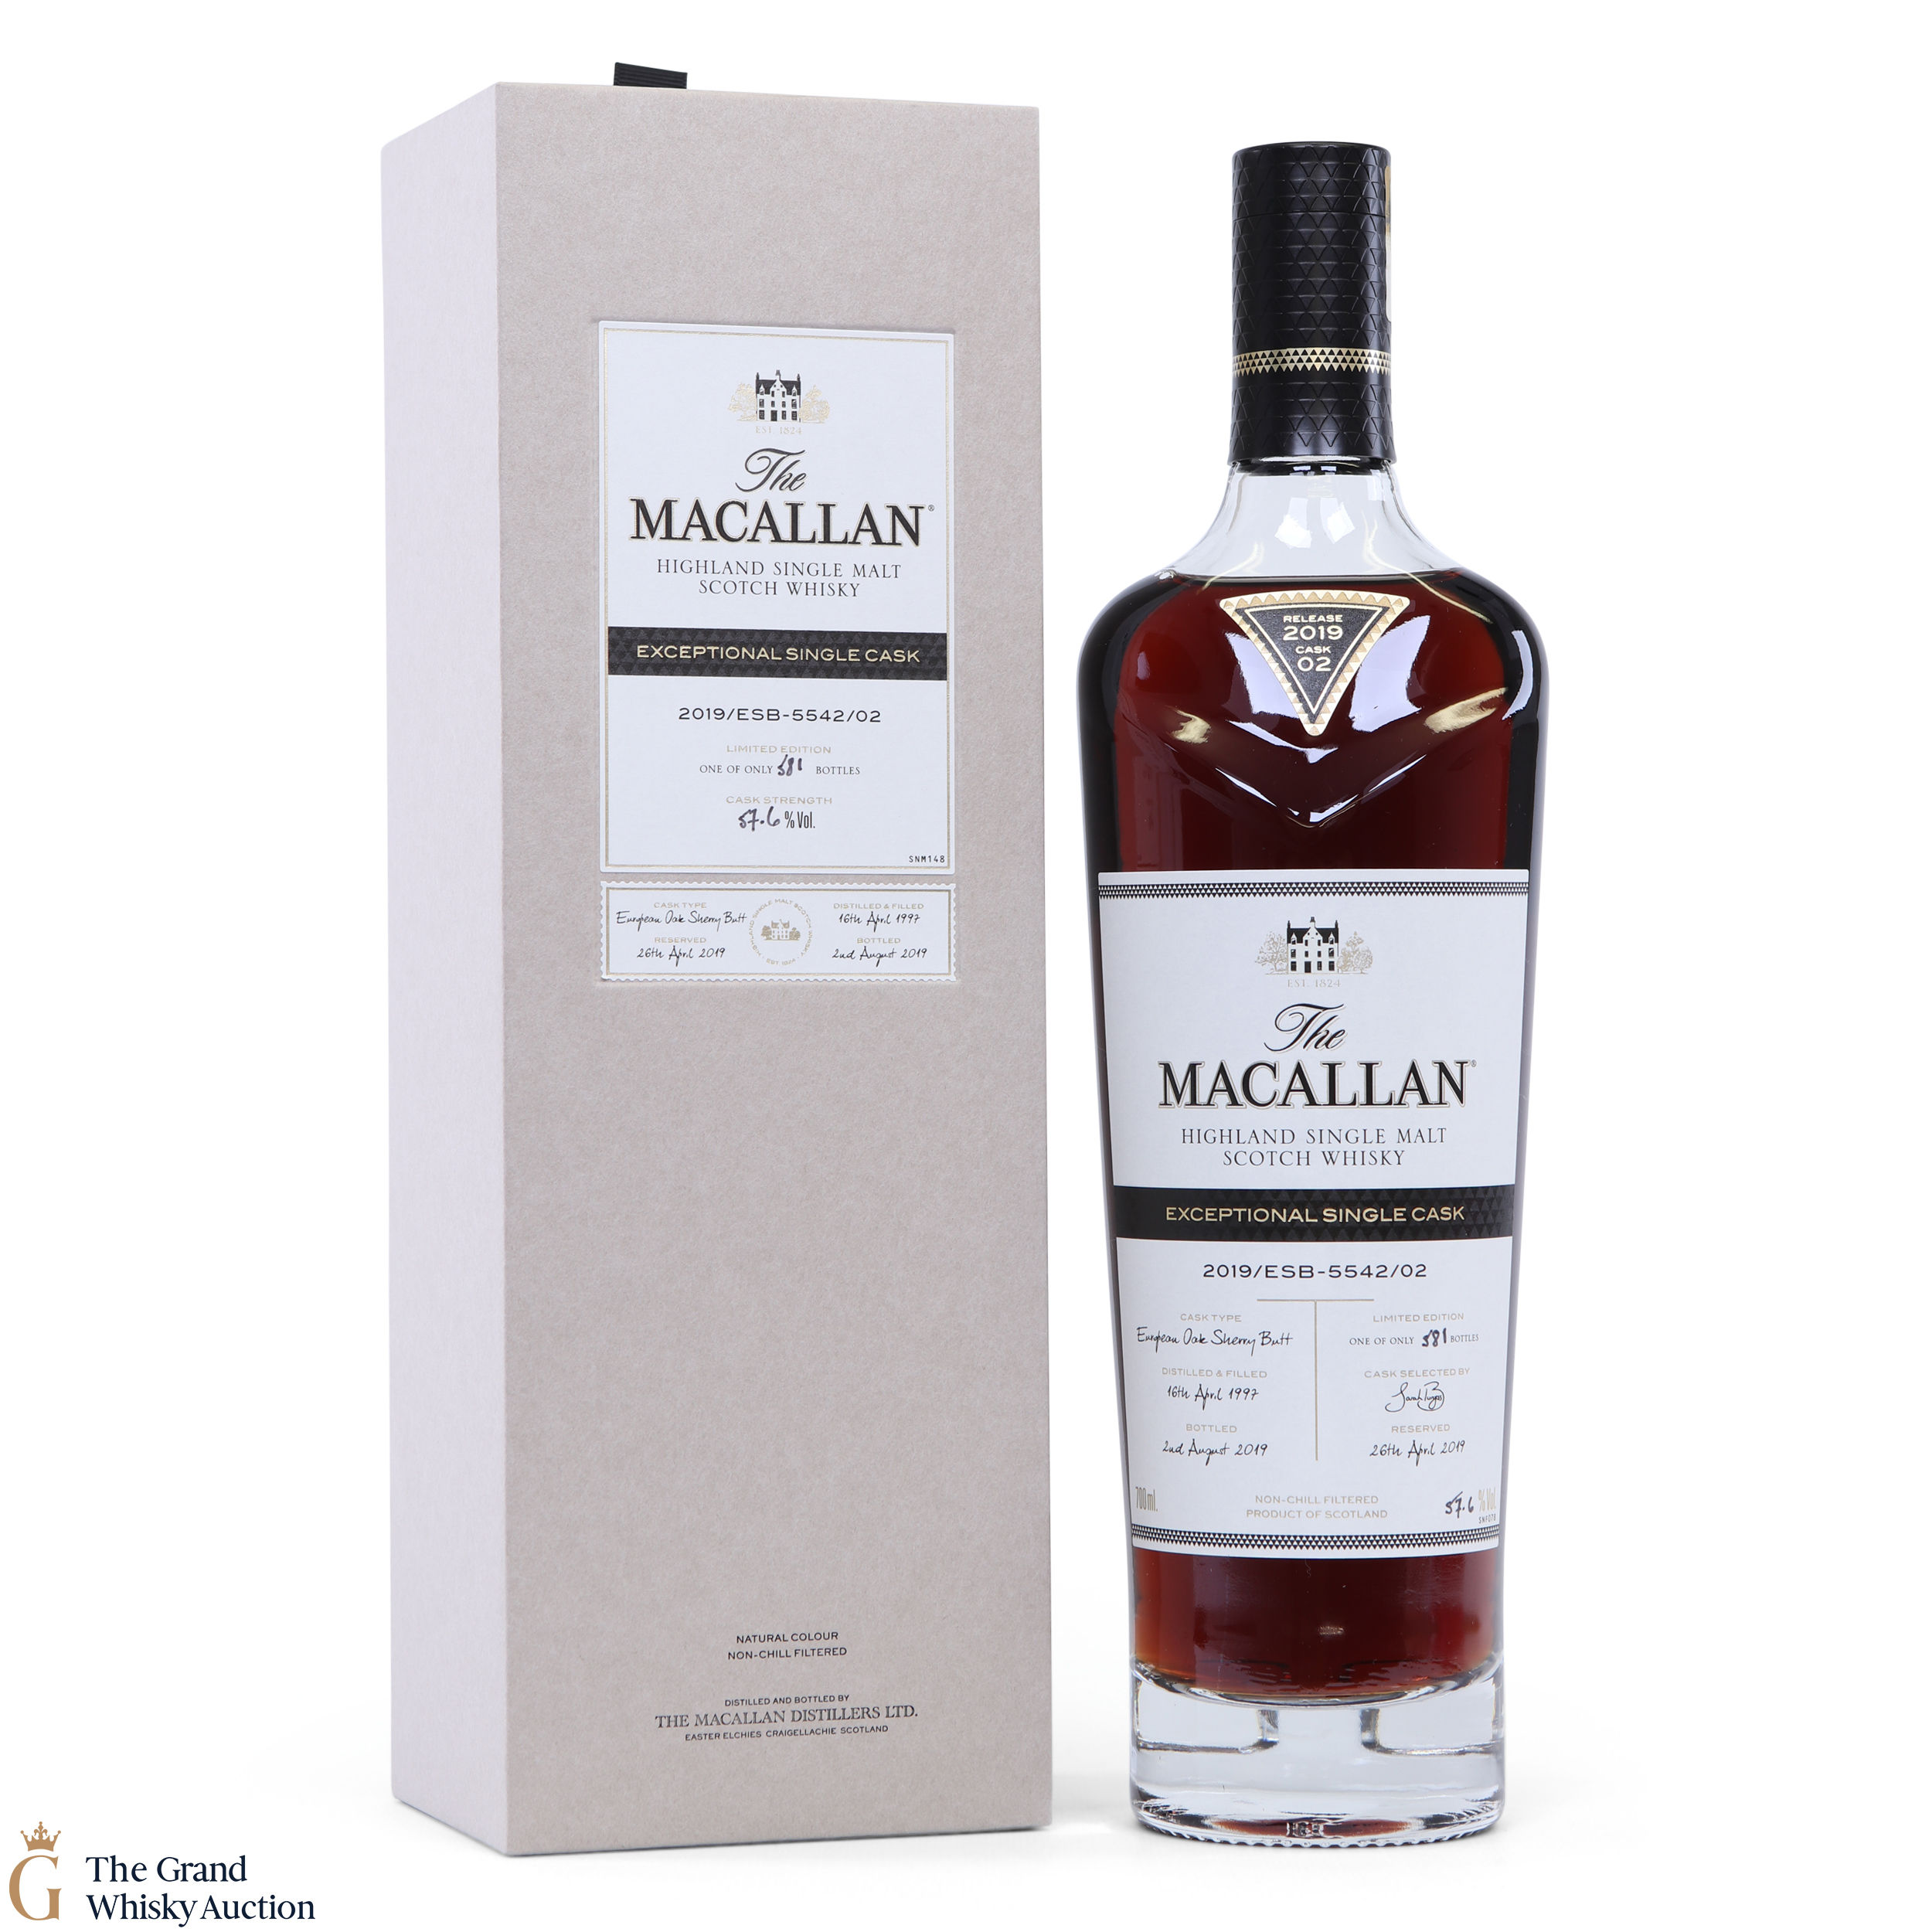 Macallan 1997 Exceptional Cask 5542 02 2019 Auction The Grand Whisky Auction